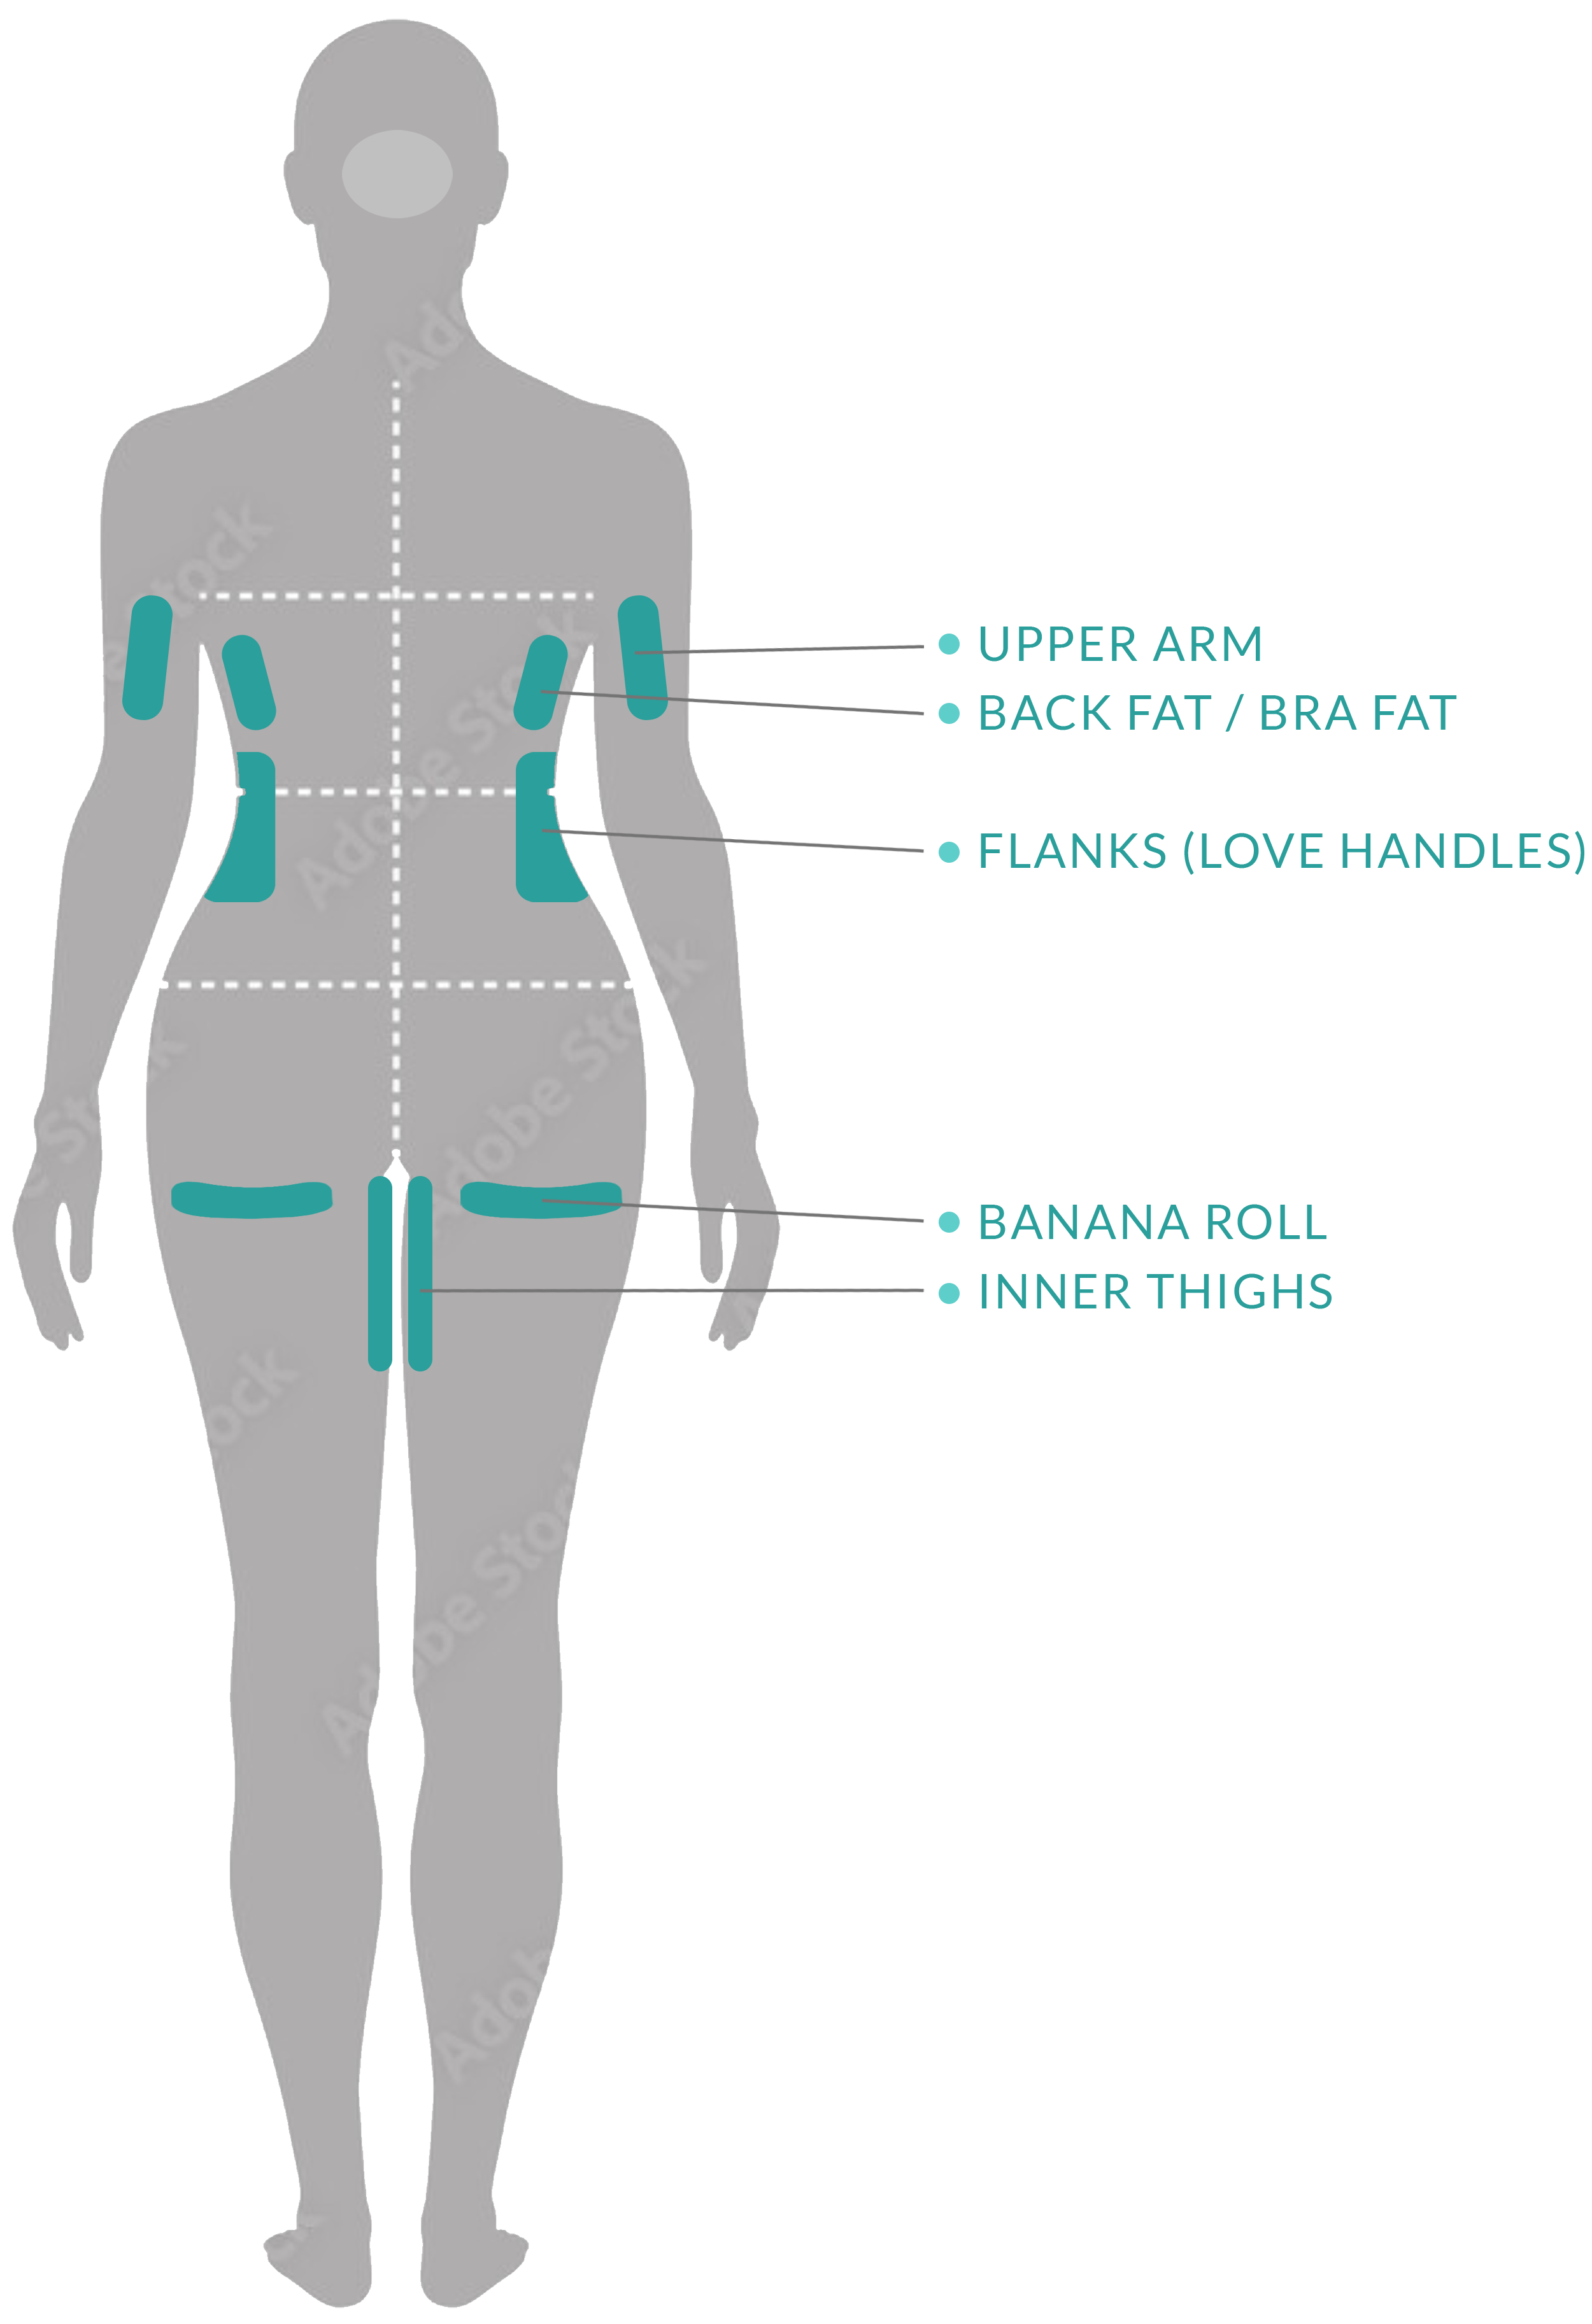 Diagram of female back showing body zones targeted by CoolSculpting: Upper Arms, Back Fat / Bra Fat, Flank (Love Handles), Banana Roll, and Inner Thighs